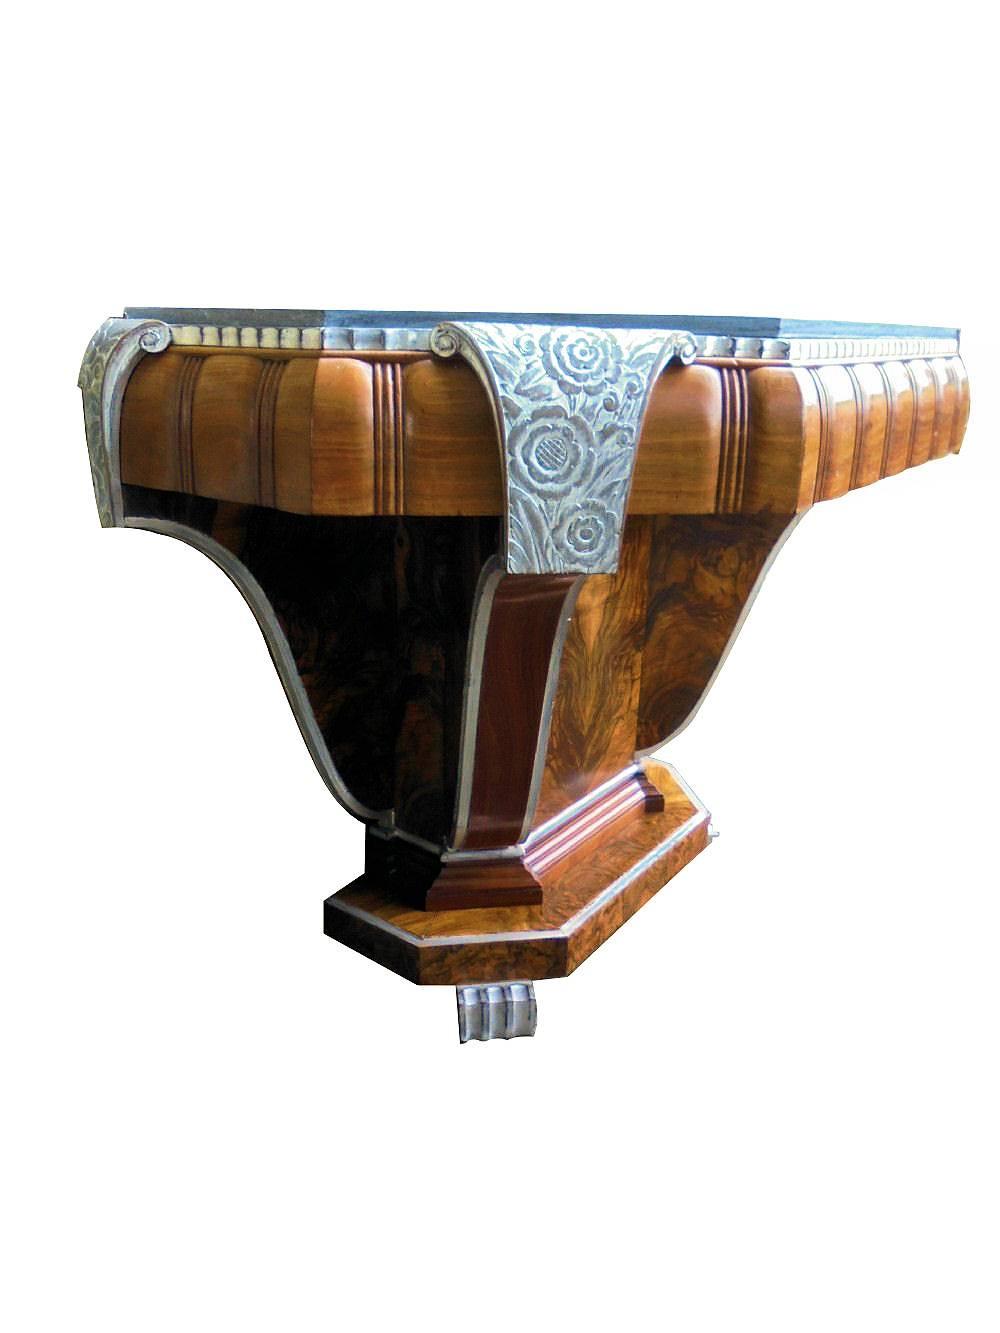 This is a very rare and one off opportunity to acquire not only a wonderful and stylish piece of furniture but something that is unique and a piece of English history. For your consideration is this Art Deco console table which was made for the